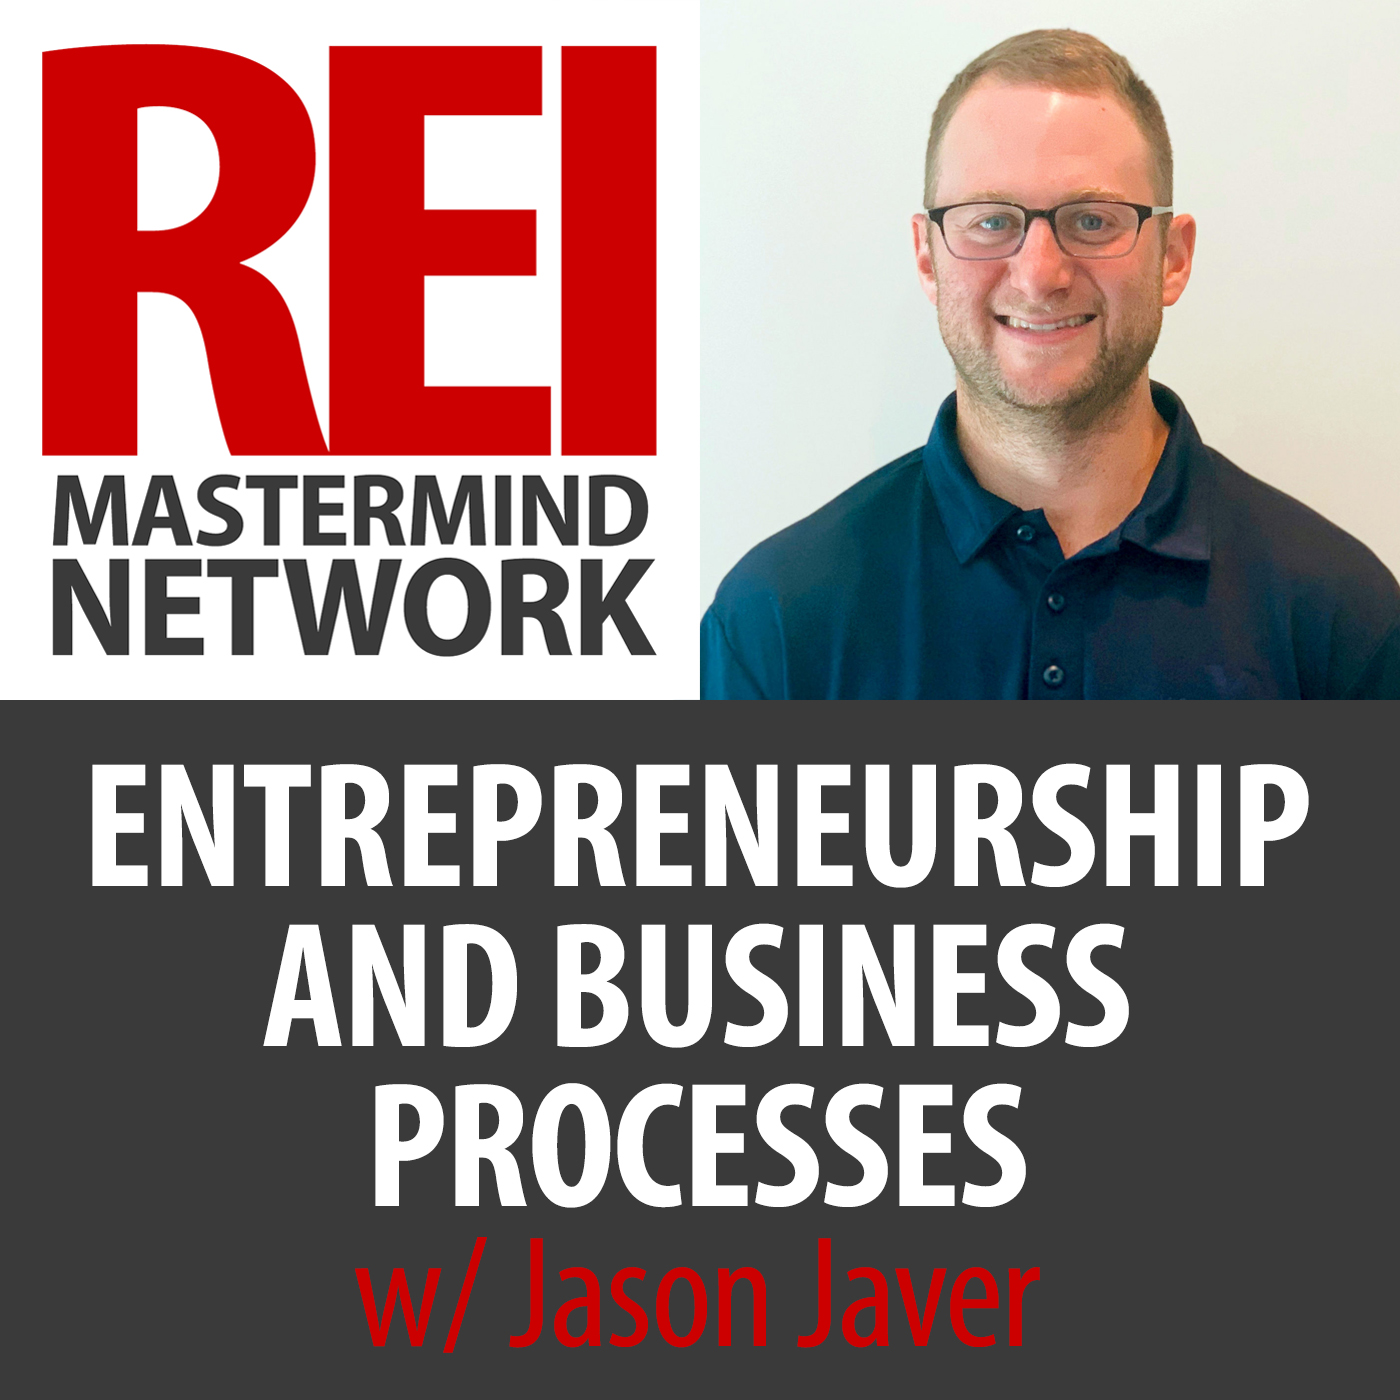 Entrepreneurship and Business Processes with Jason Javer #212